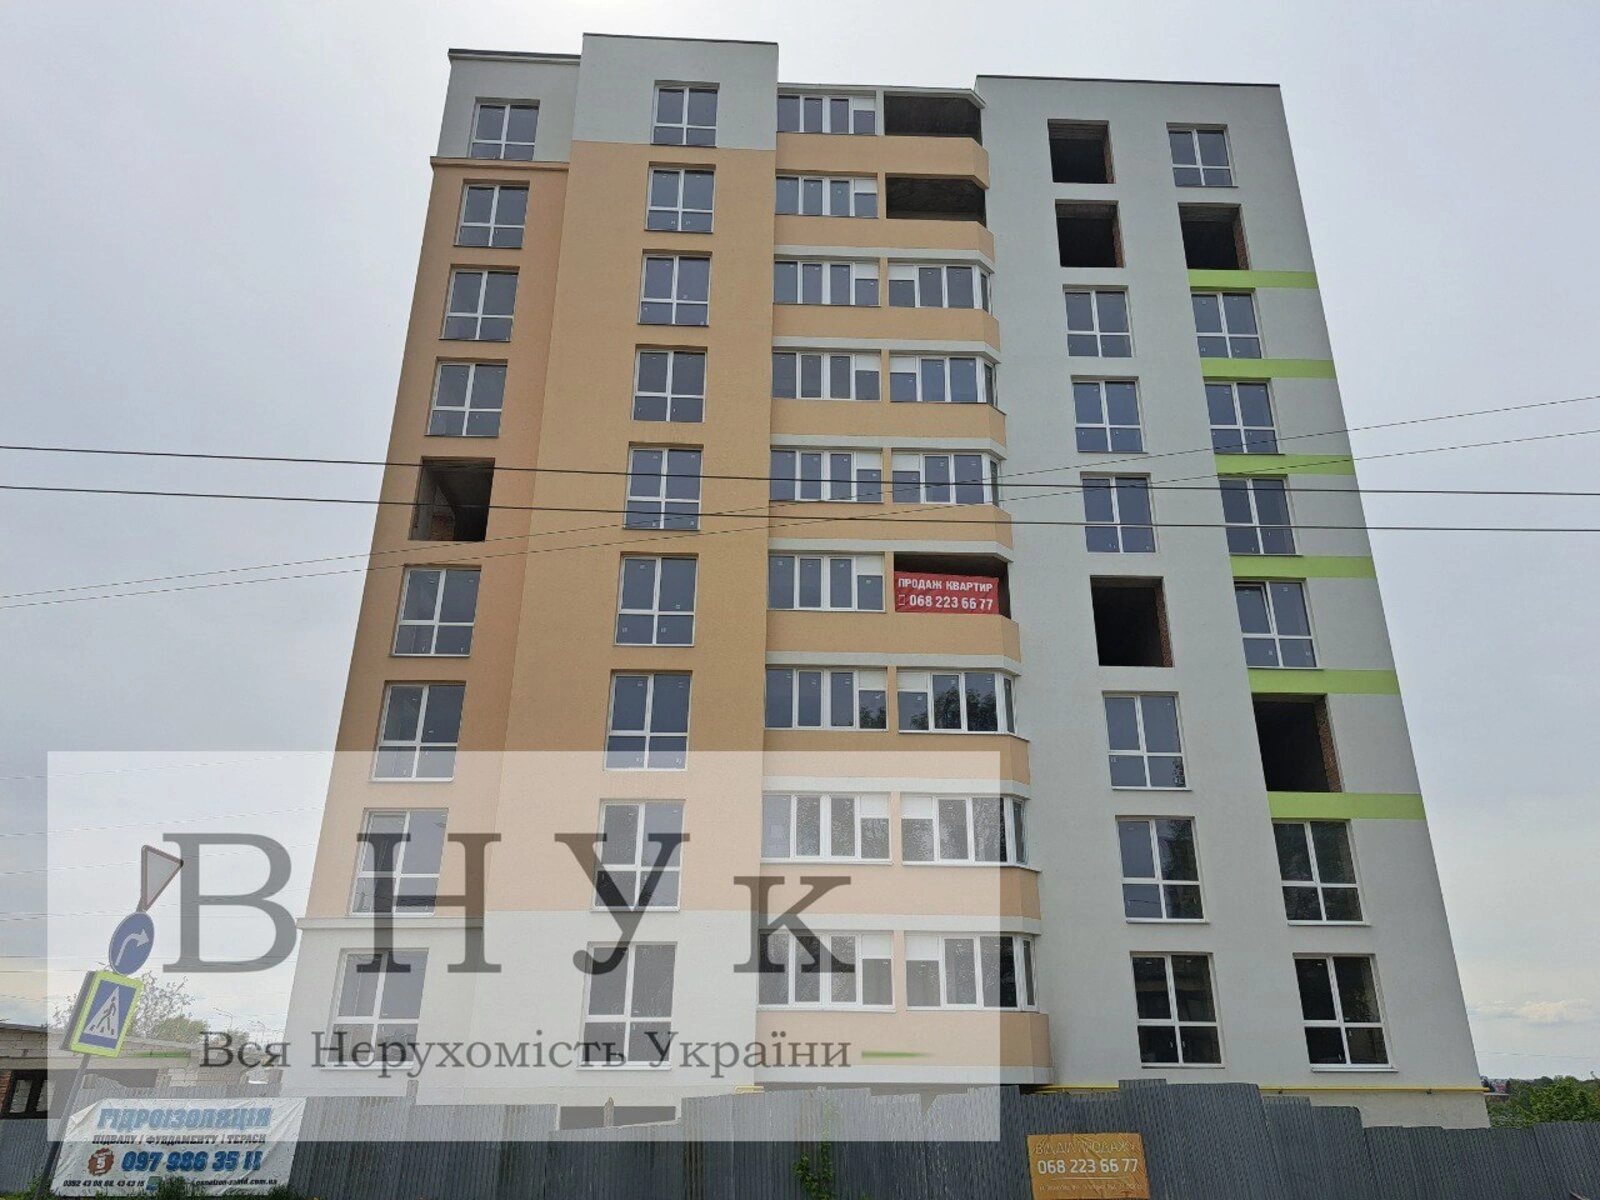 Apartments for sale. 2 rooms, 66 m², 8th floor/9 floors. Dovzhenka O. vul., Ternopil. 